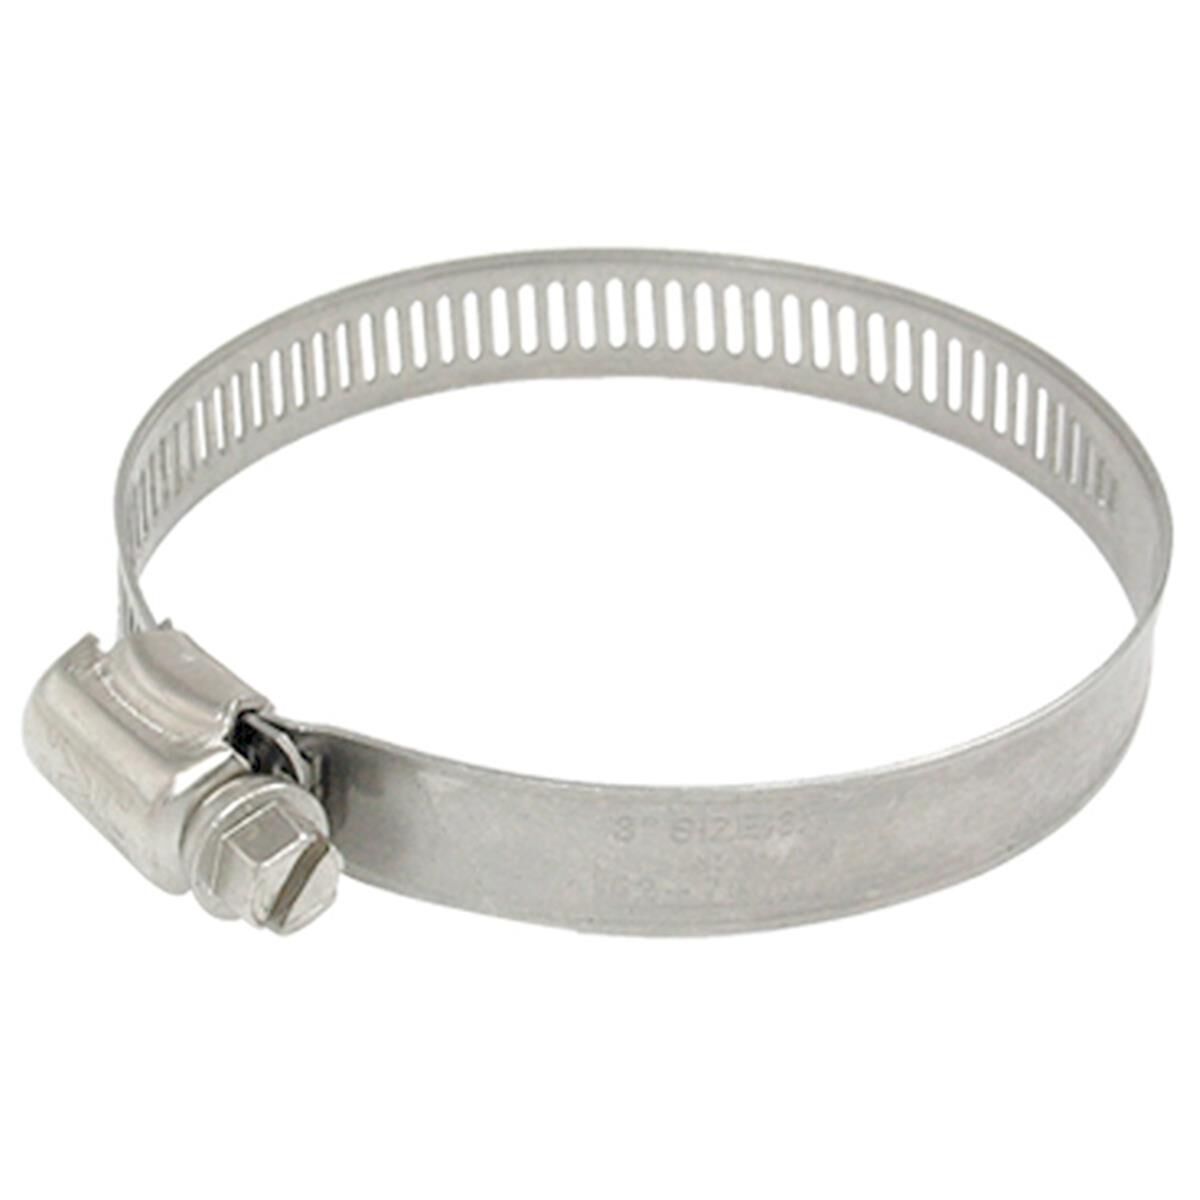 12-19MM STAINLESS HOSE CLAMP 10 PACK, , scaau_hi-res